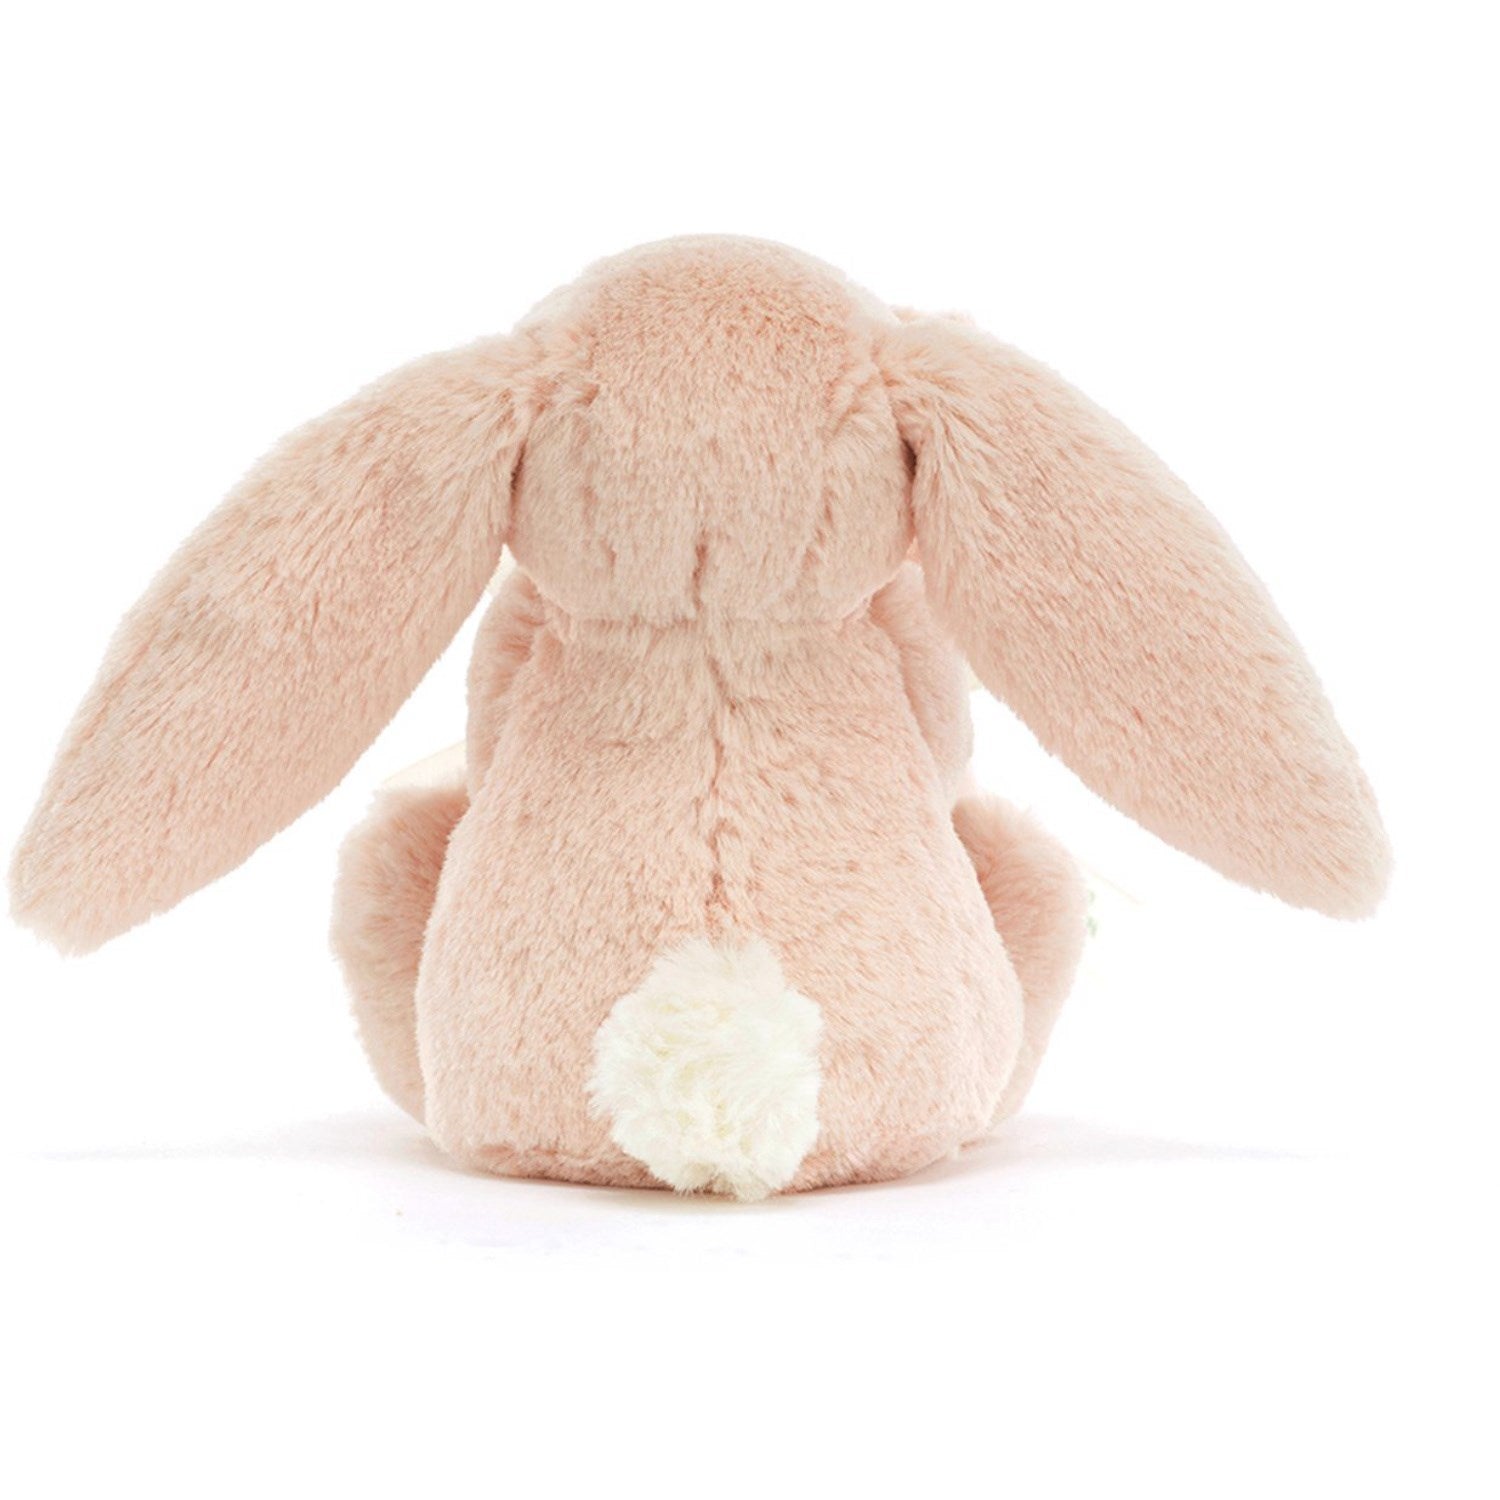 Jellycat Bashful Blush Bunny Soother 5